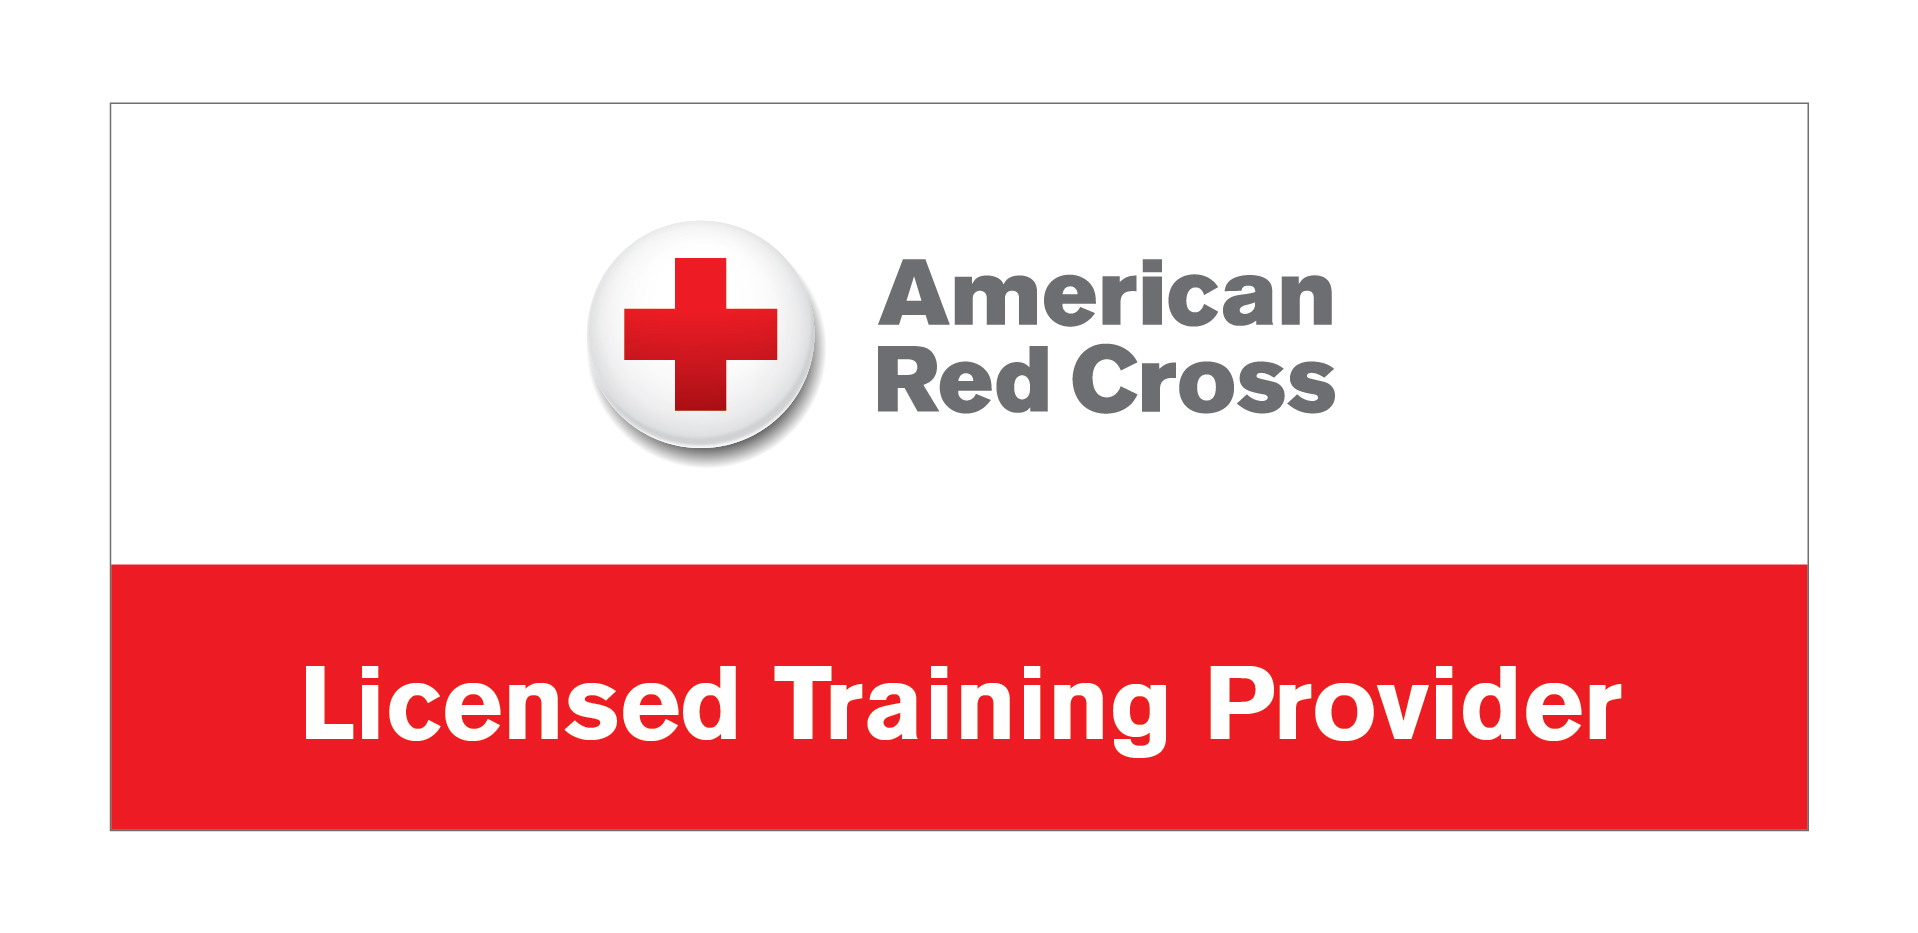 We’re adding American Red Cross courses to our class schedule